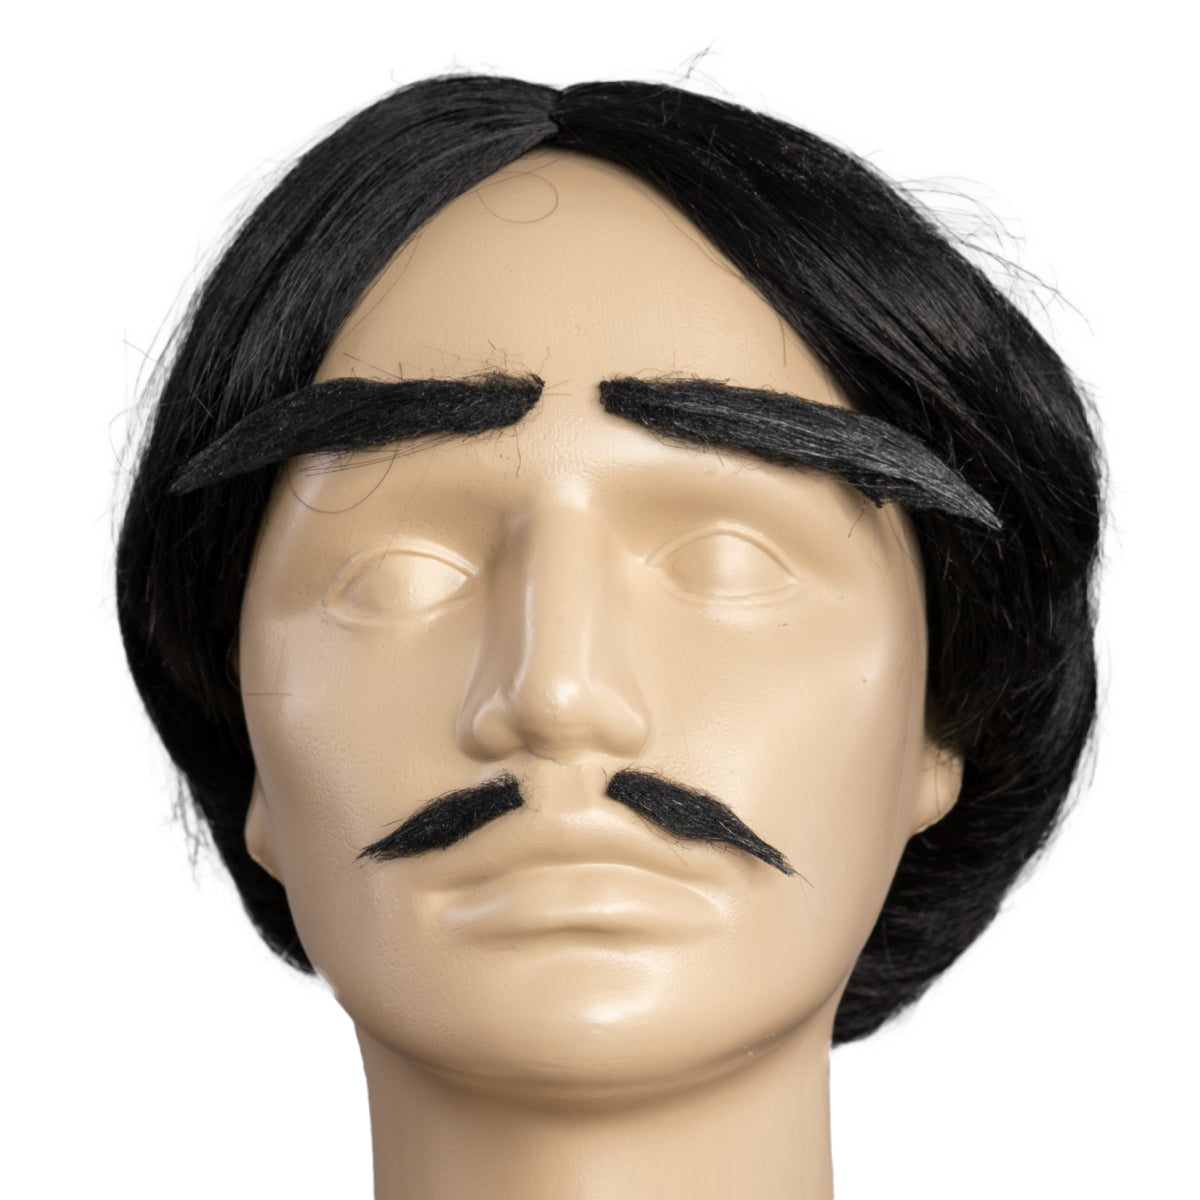 Gomez Adams Family Wig, Mustache, and Eyebrow Set for Halloween Costume Accessory and Cosplay